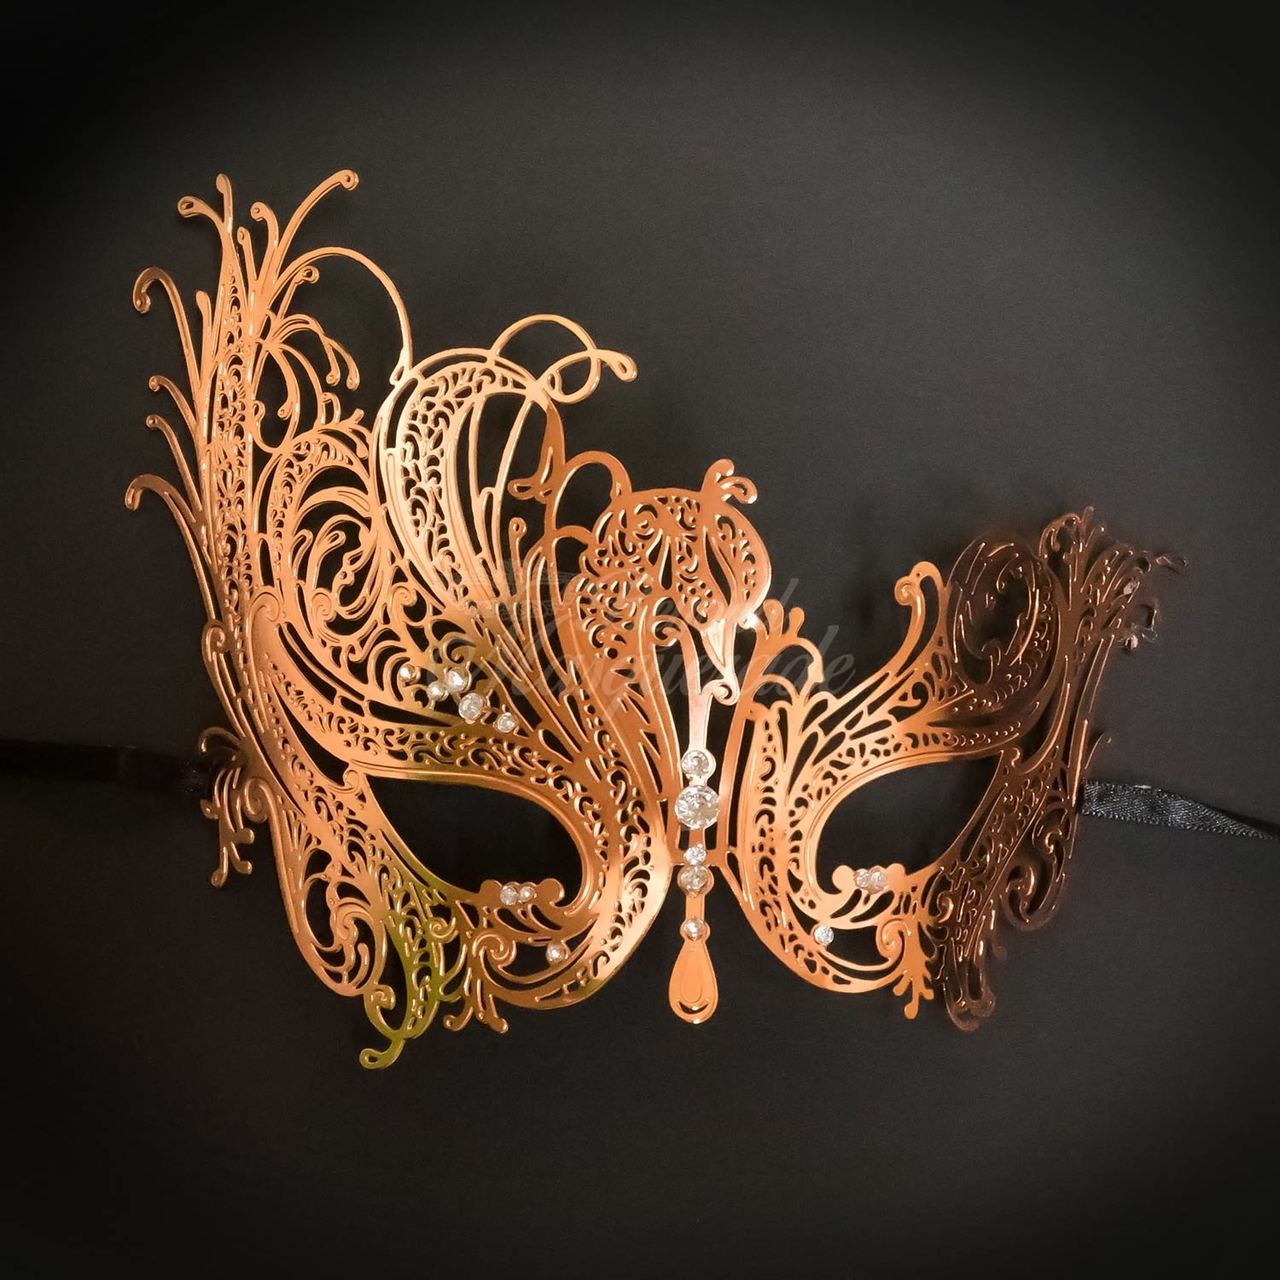 Blue Lace Mardi Gras Mask Masquerade Mask Festival Mask Soft Bendable Mask With Ribbon Tie Lace Masquerade Mask Rave Mask